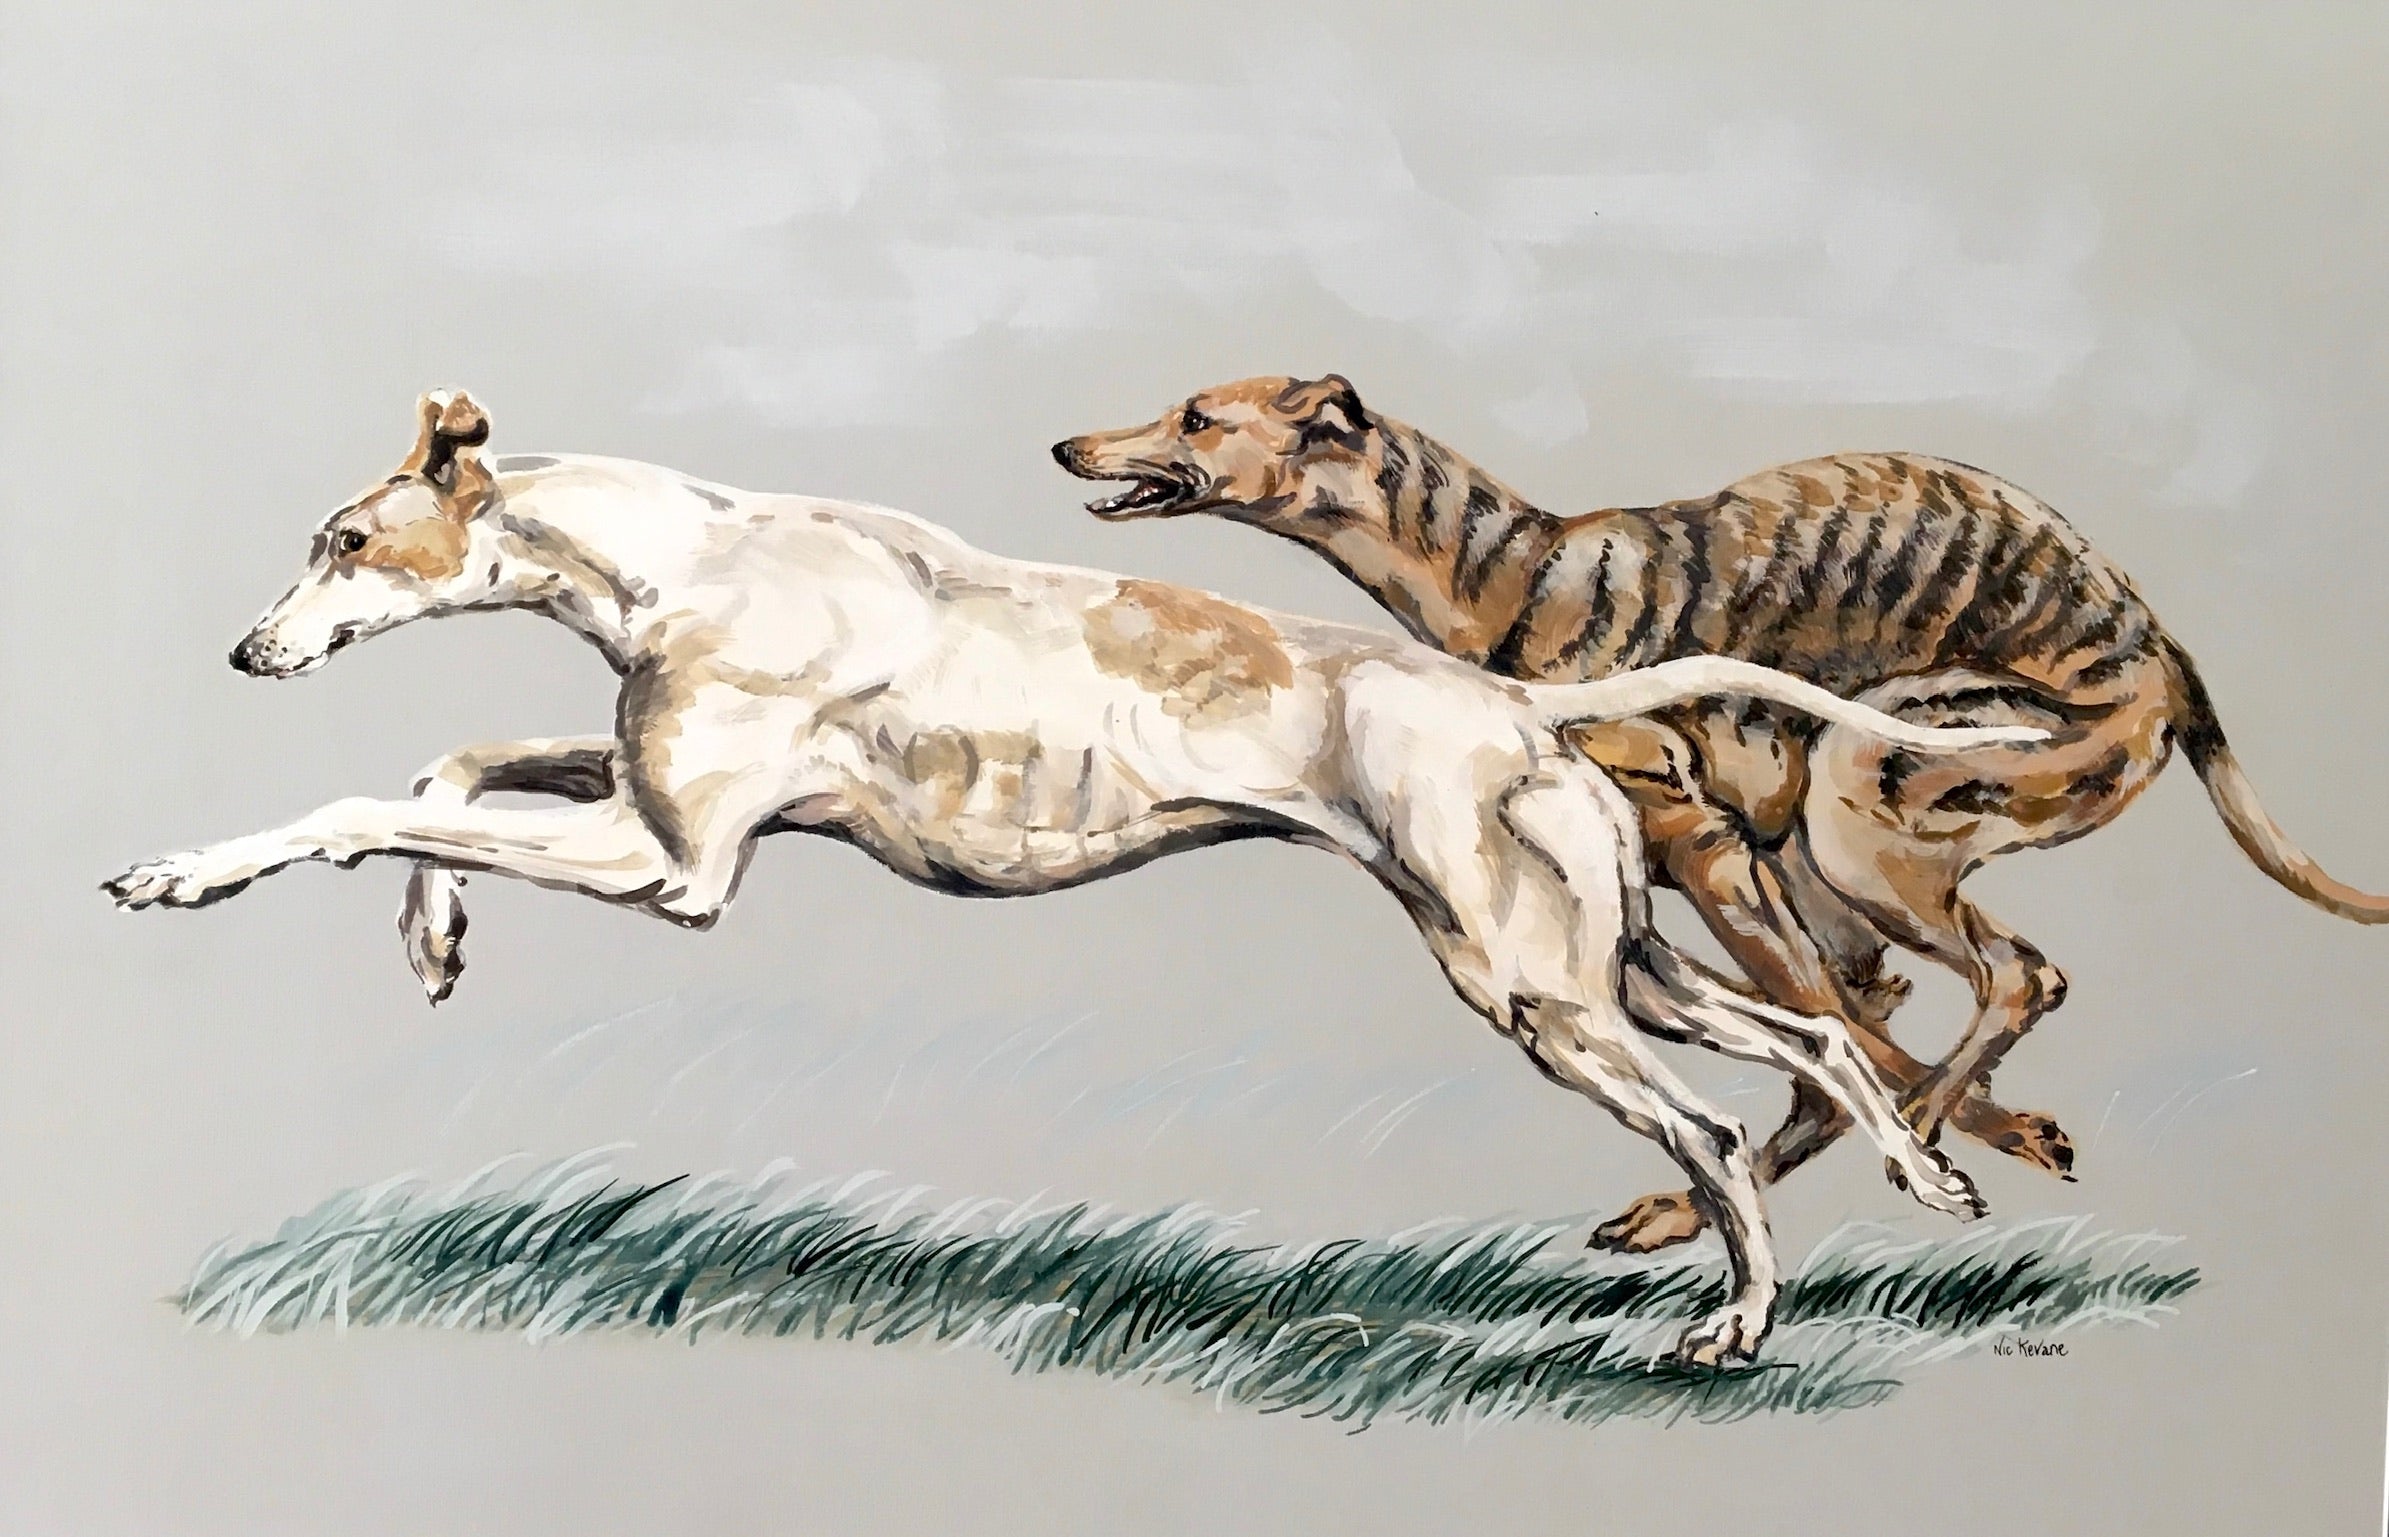  This painting shows two greyhounds racing with each other.  The greyhound is a wonderful piece of aerodynamic engineering, bred for purpose. They are a delight to paint as all their muscle and bone structure is ‘on show’.